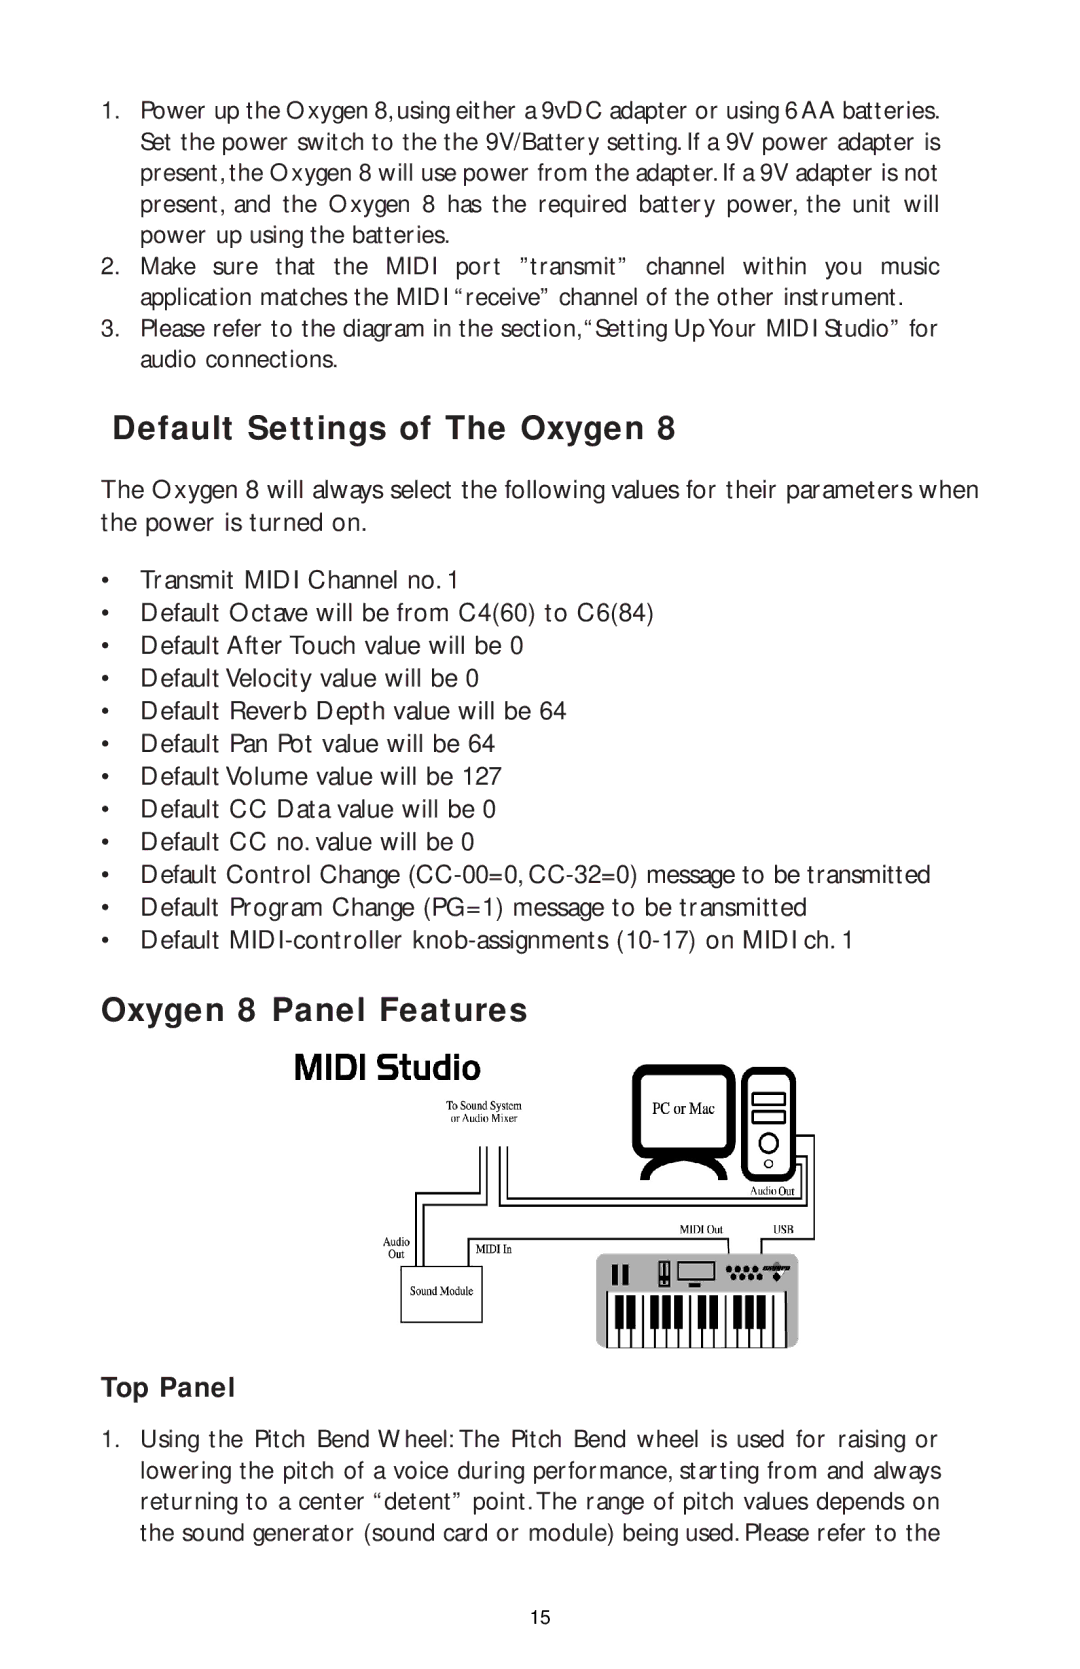 M-Audio OXY8_050503, OXYGEN 8 specifications Default Settings of The Oxygen, Oxygen 8 Panel Features, Top Panel 